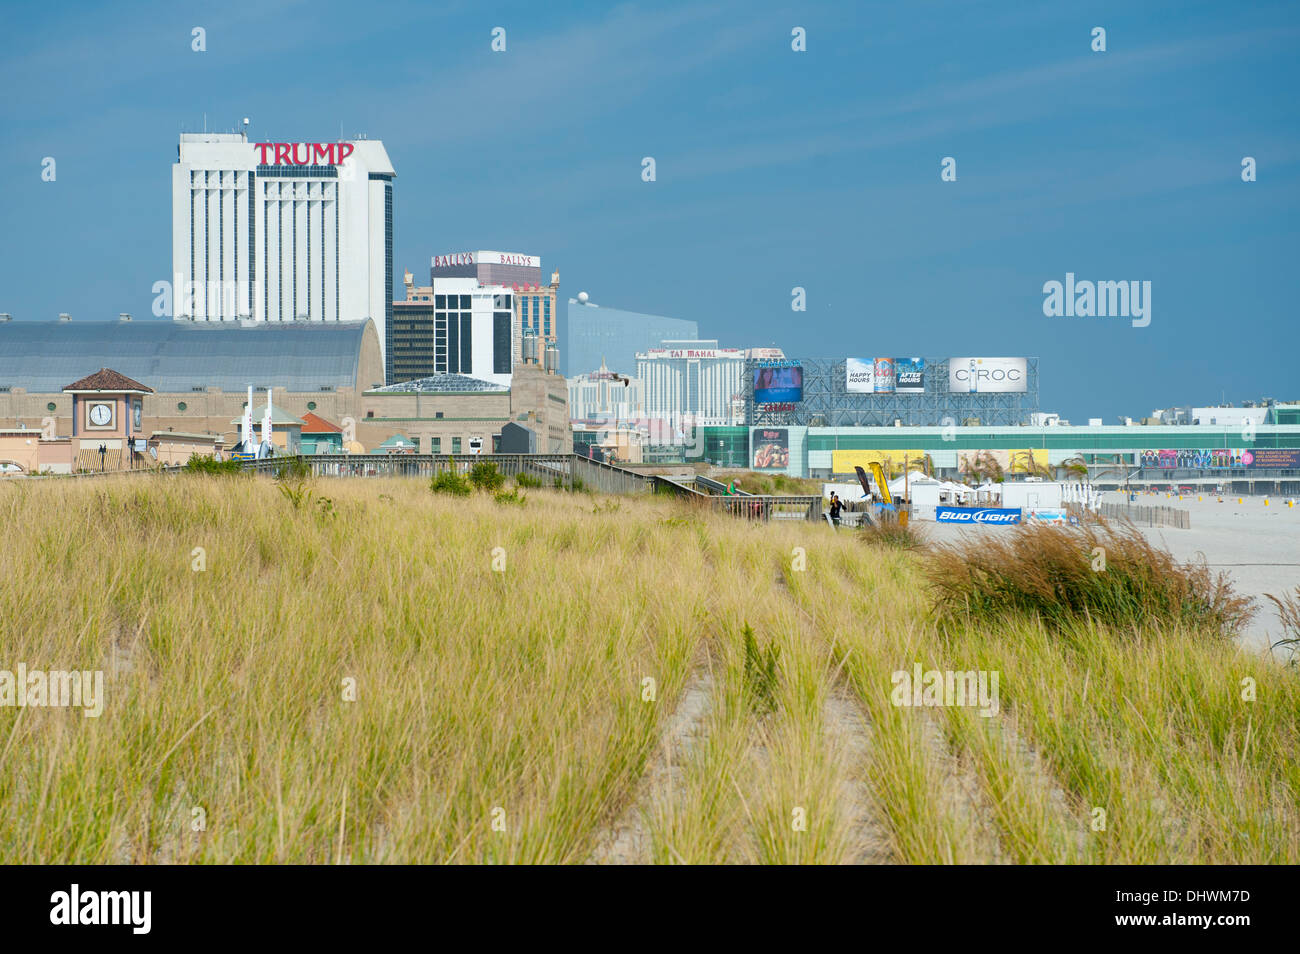 USA America New Jersey NJ N.J. Atlantic City planted dune grass helps keep the sand dune in place Stock Photo